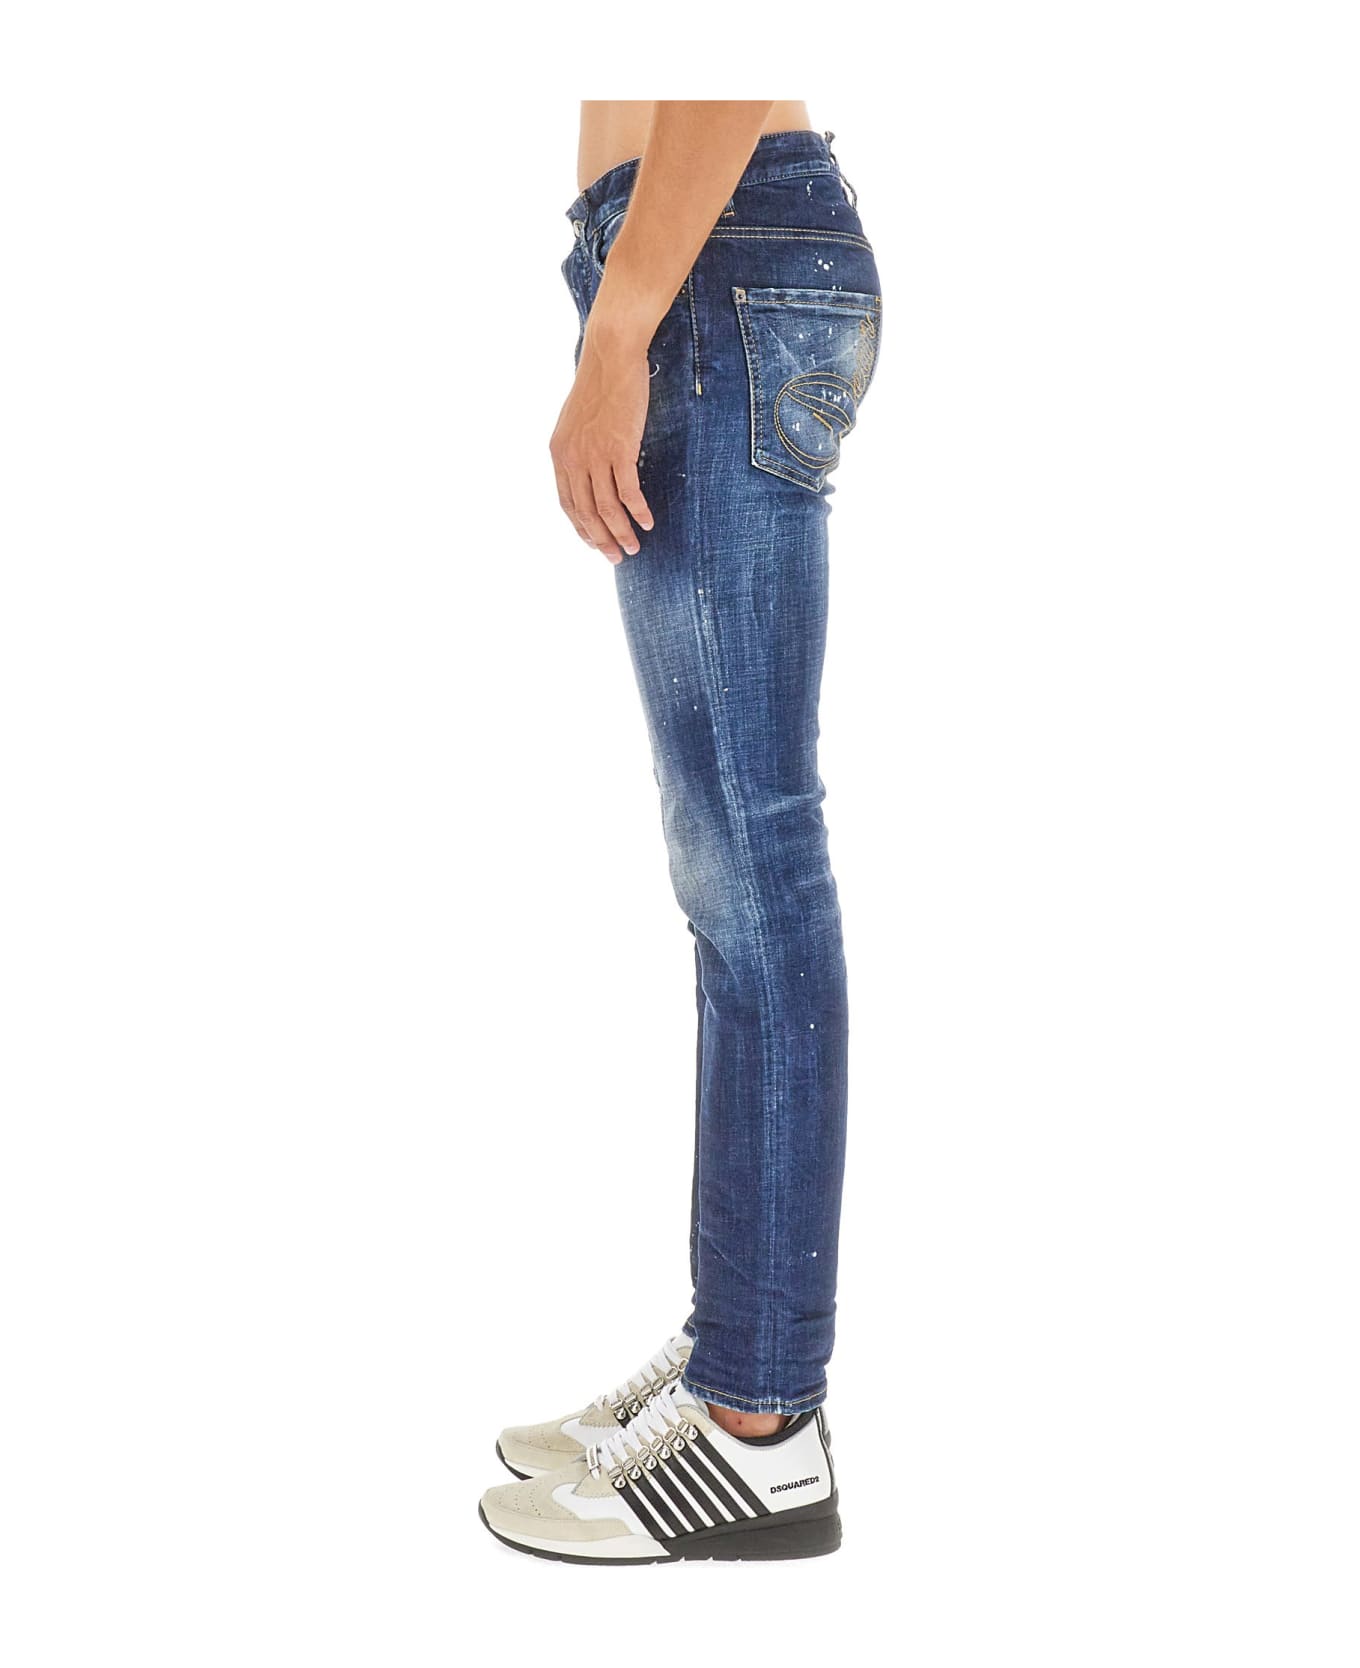 Dsquared2 "cool Guy Jean" Men's Jeans - Blue ボトムス